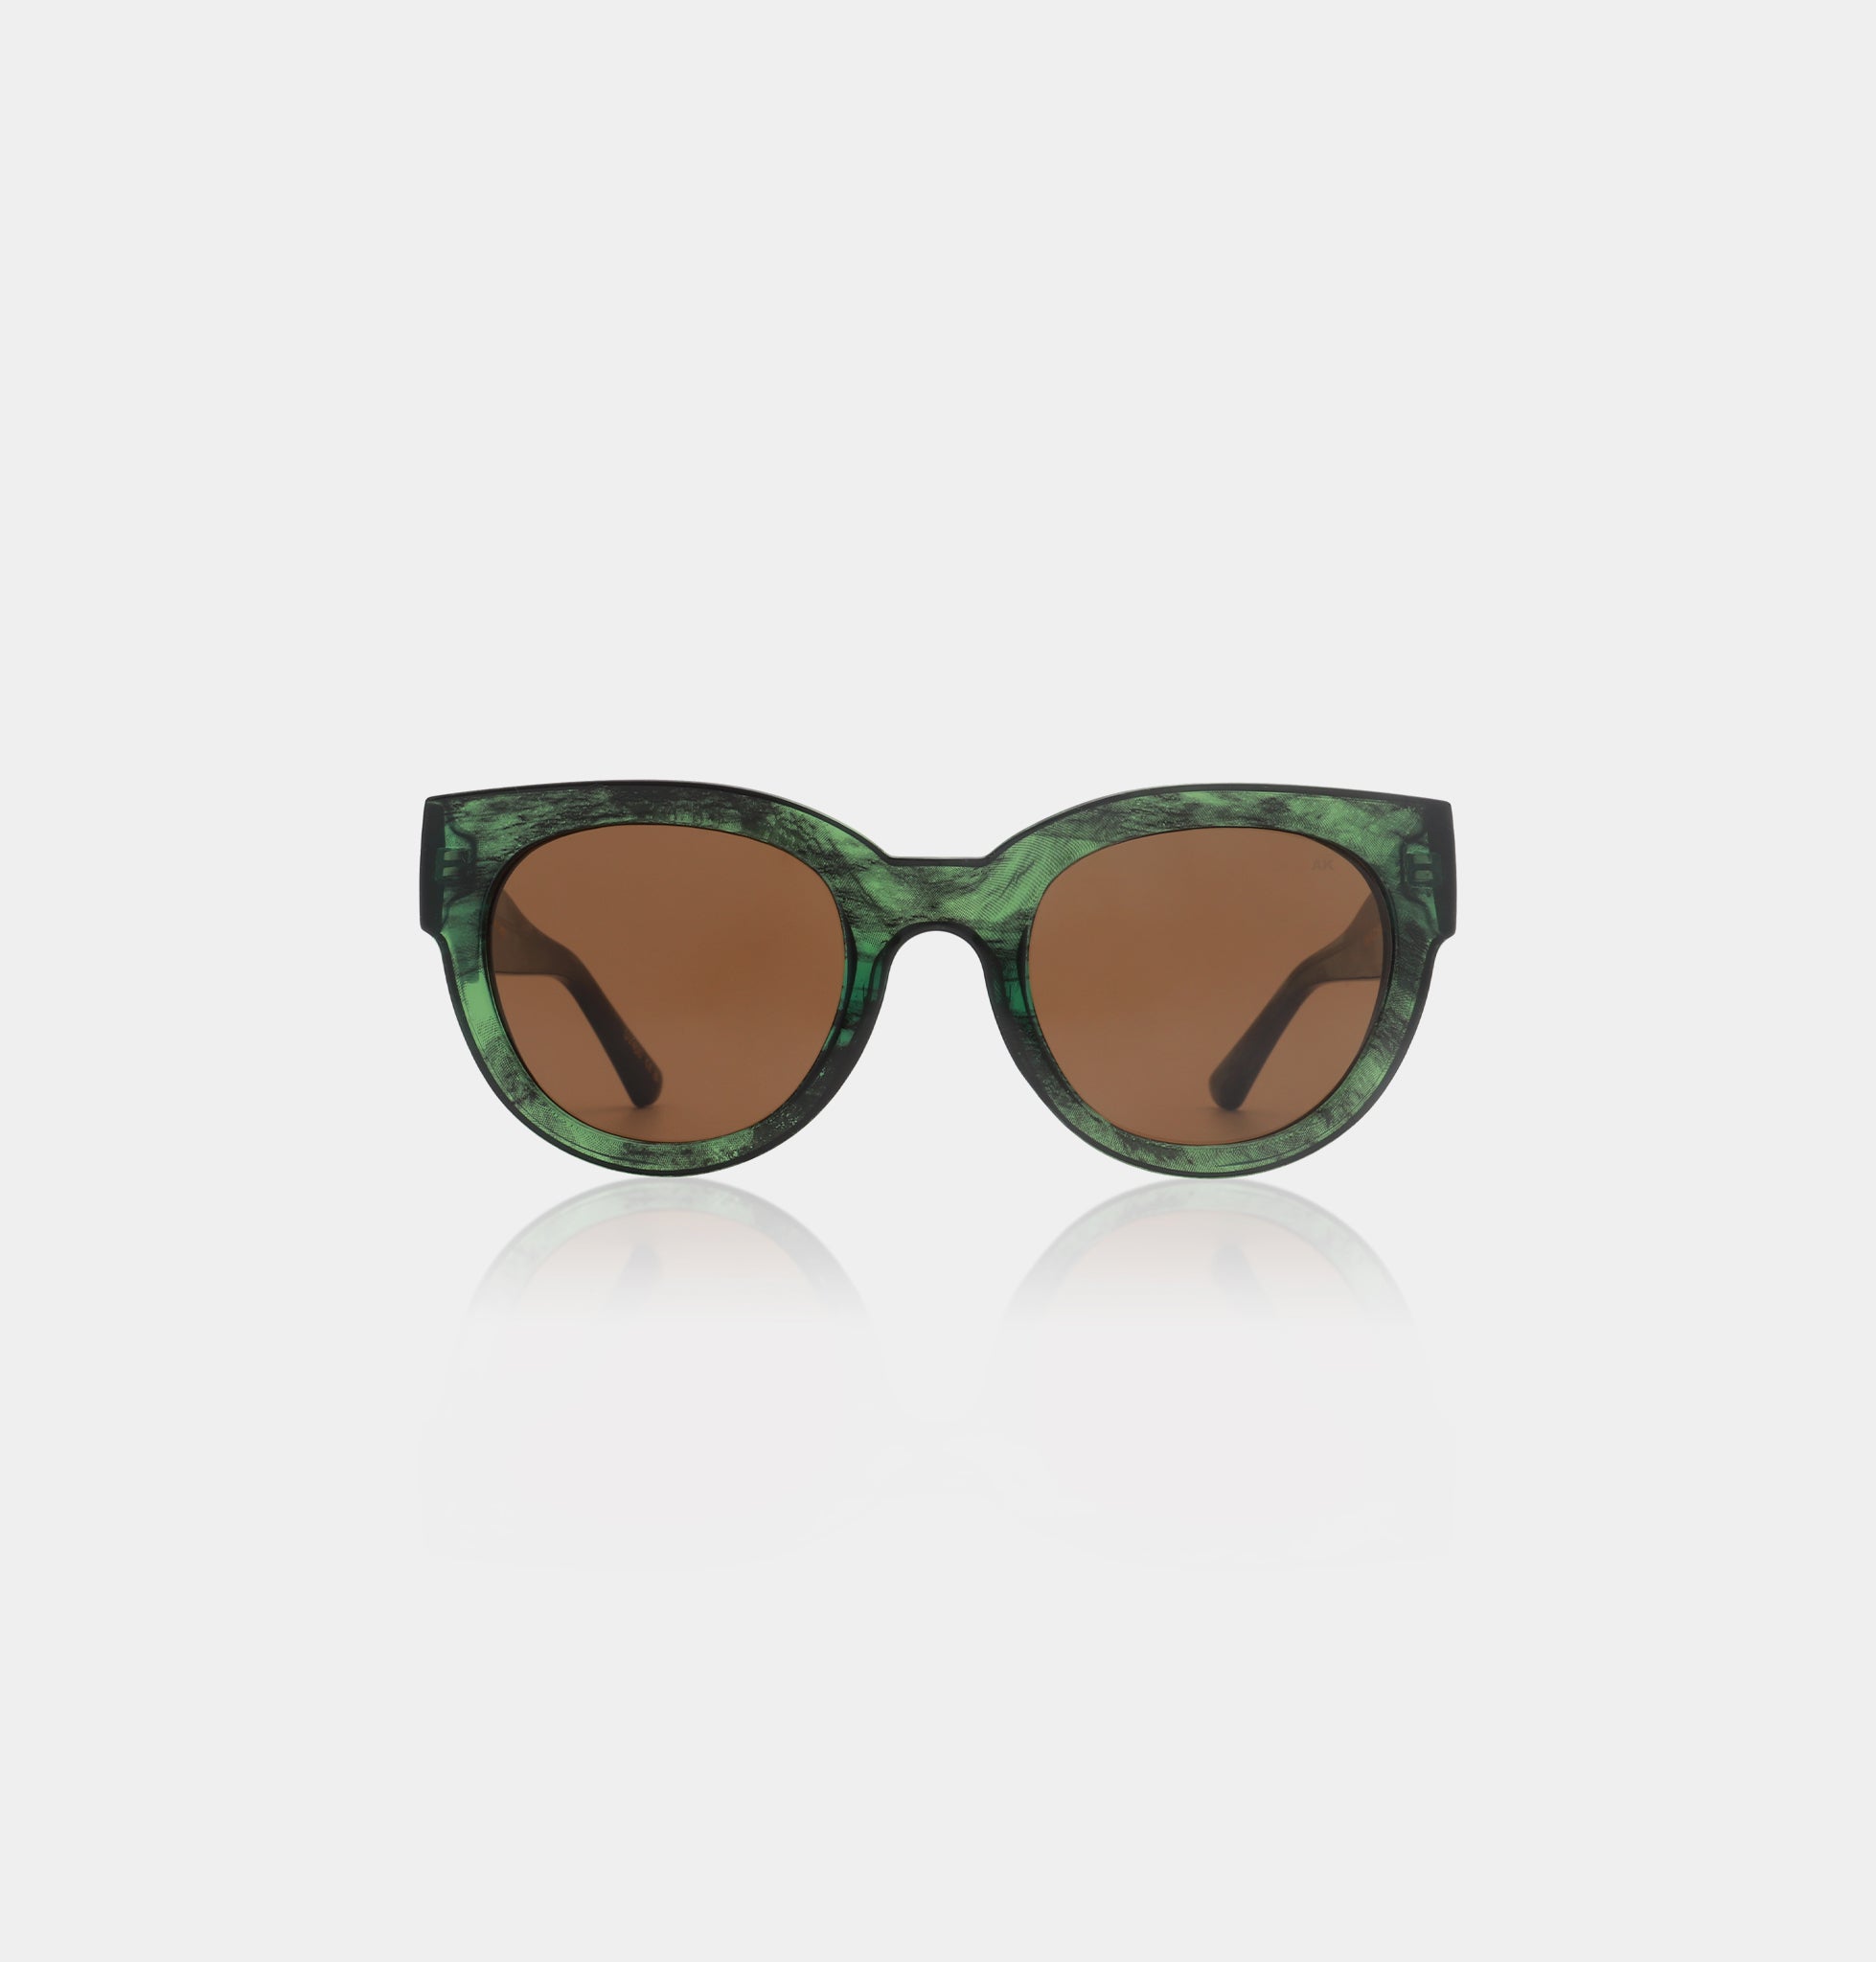 A.KJAERBEDE SUNGLASSES LILLY GREEN MARBLE